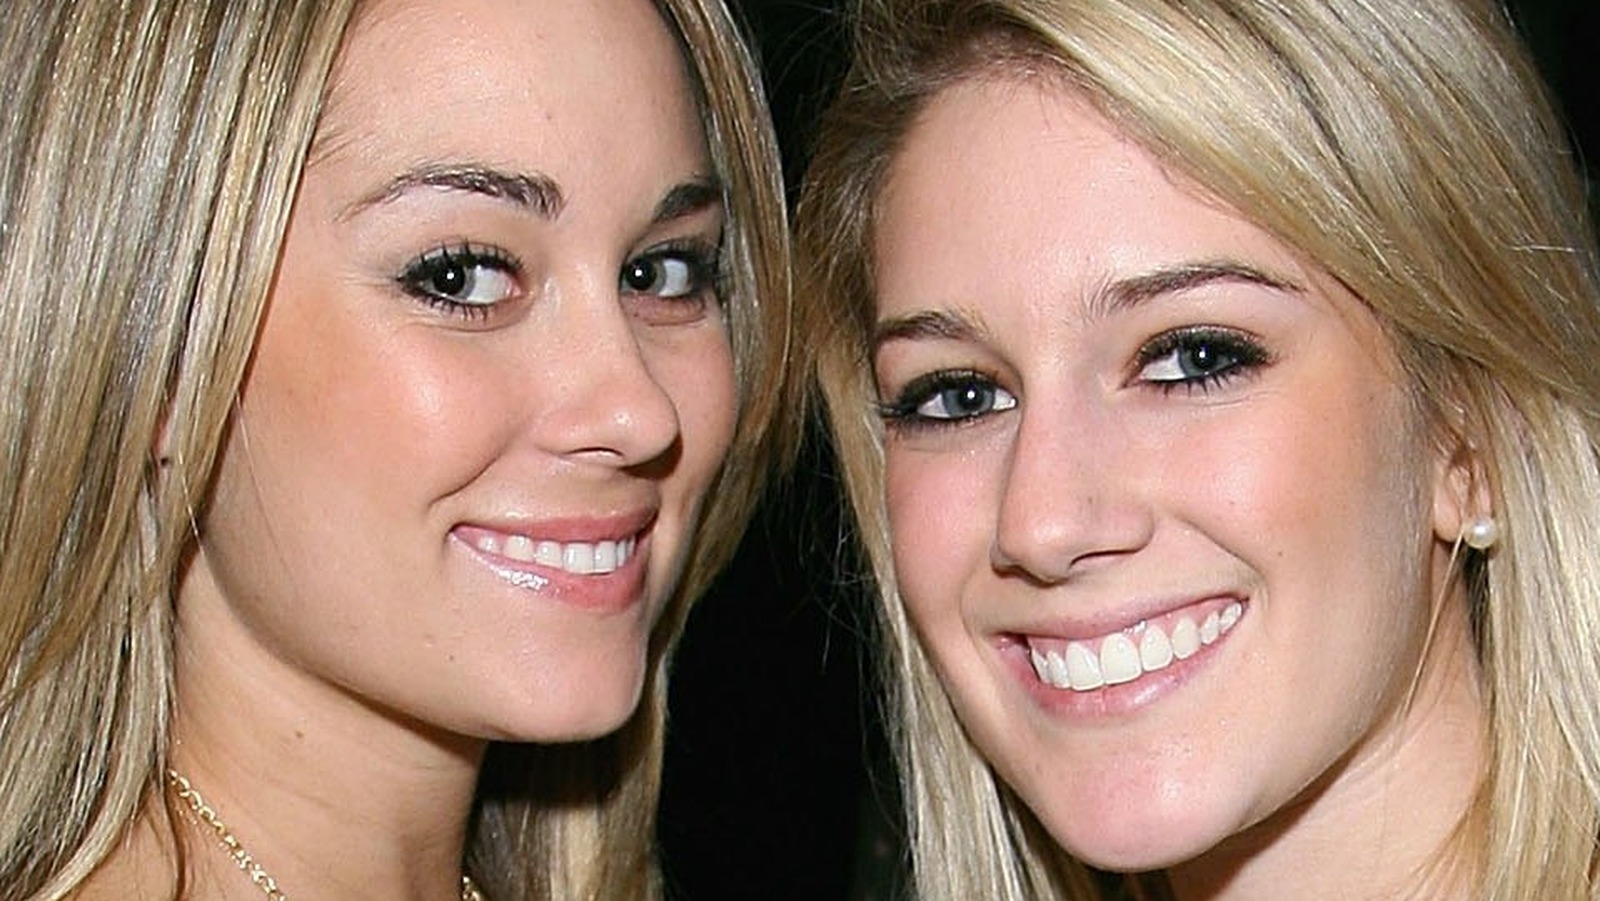 MTV's The Hills: Where are they now? Lauren and the rest of the cast